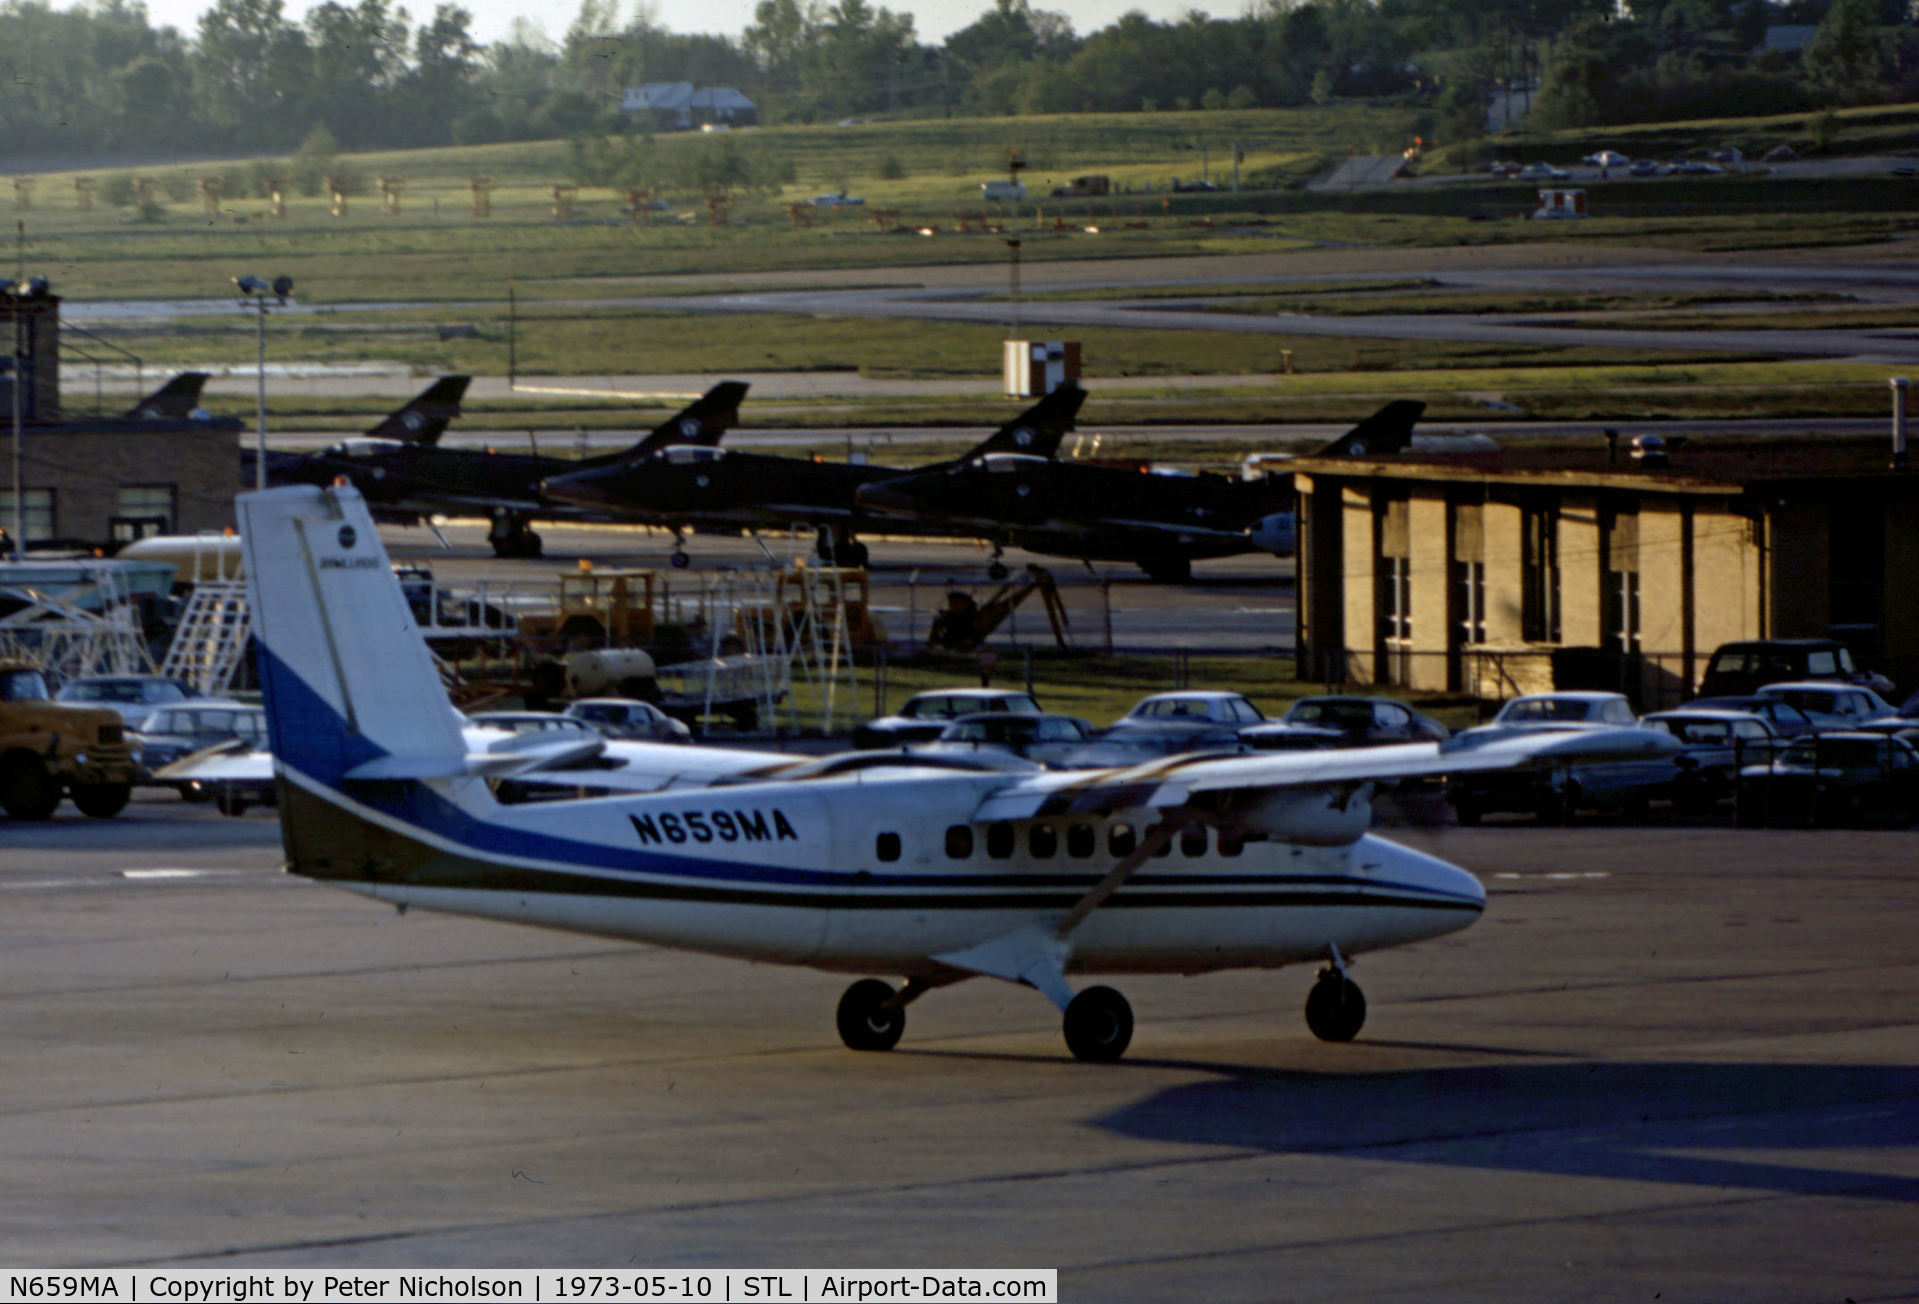 N659MA, 1969 De Havilland Canada DHC-6-200 Twin Otter C/N 229, Twin Otter 200 of Air Illinois as seen at St. Louis in May 1973.